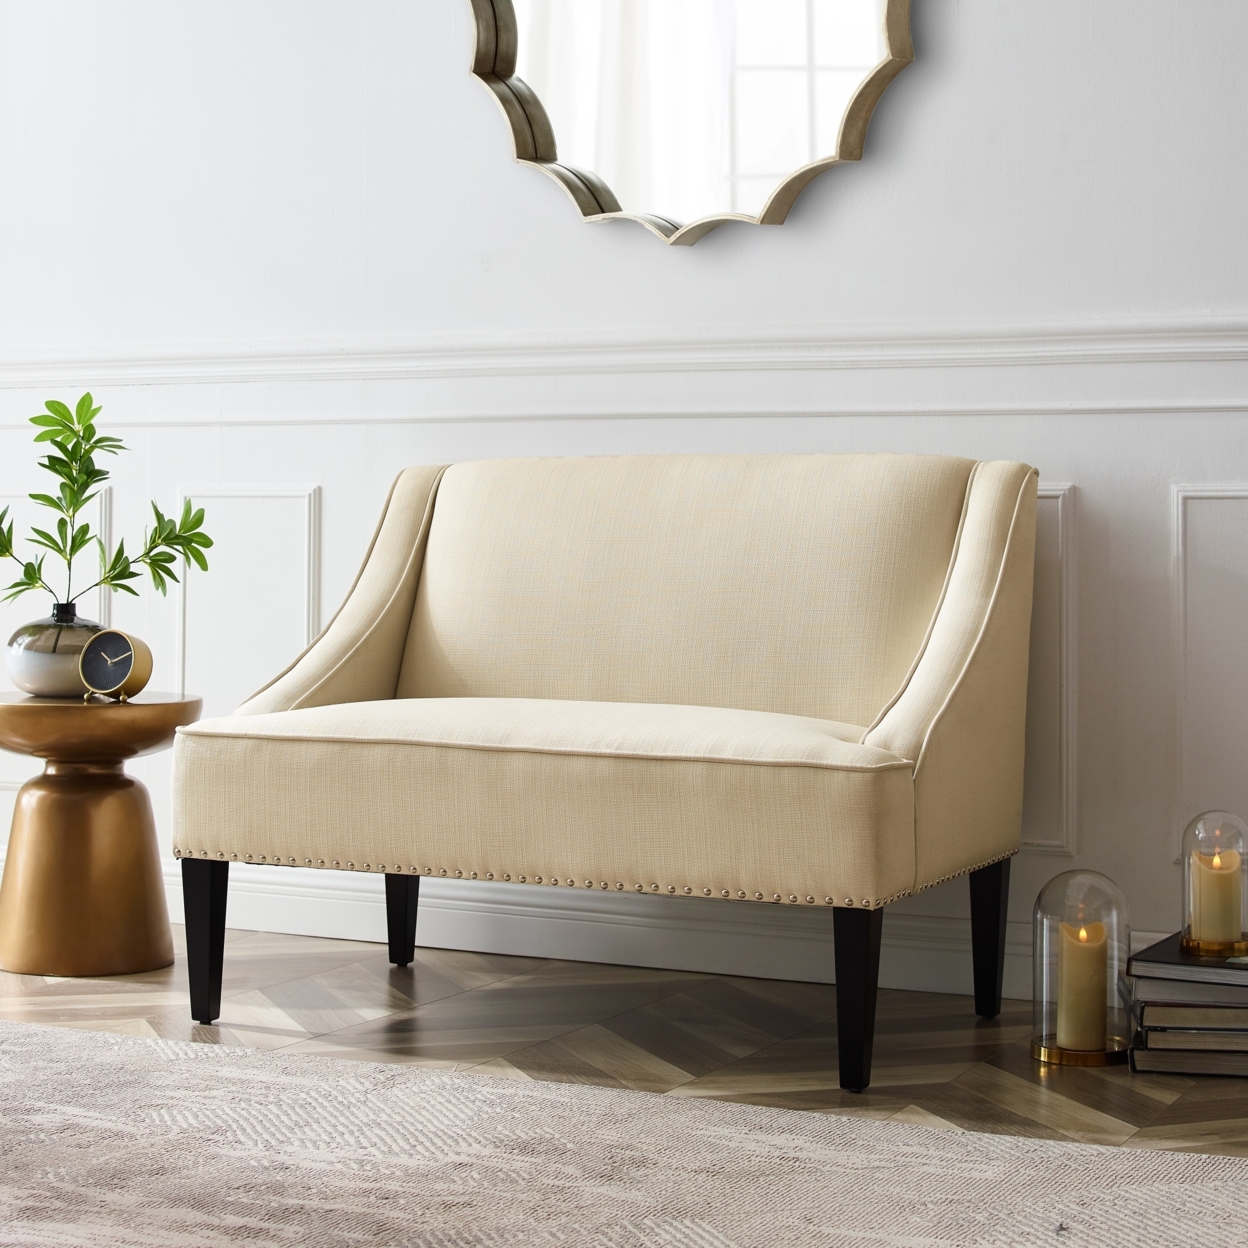 Janessa Linen Bench - Upholstered With Swoop Arms - Cream White